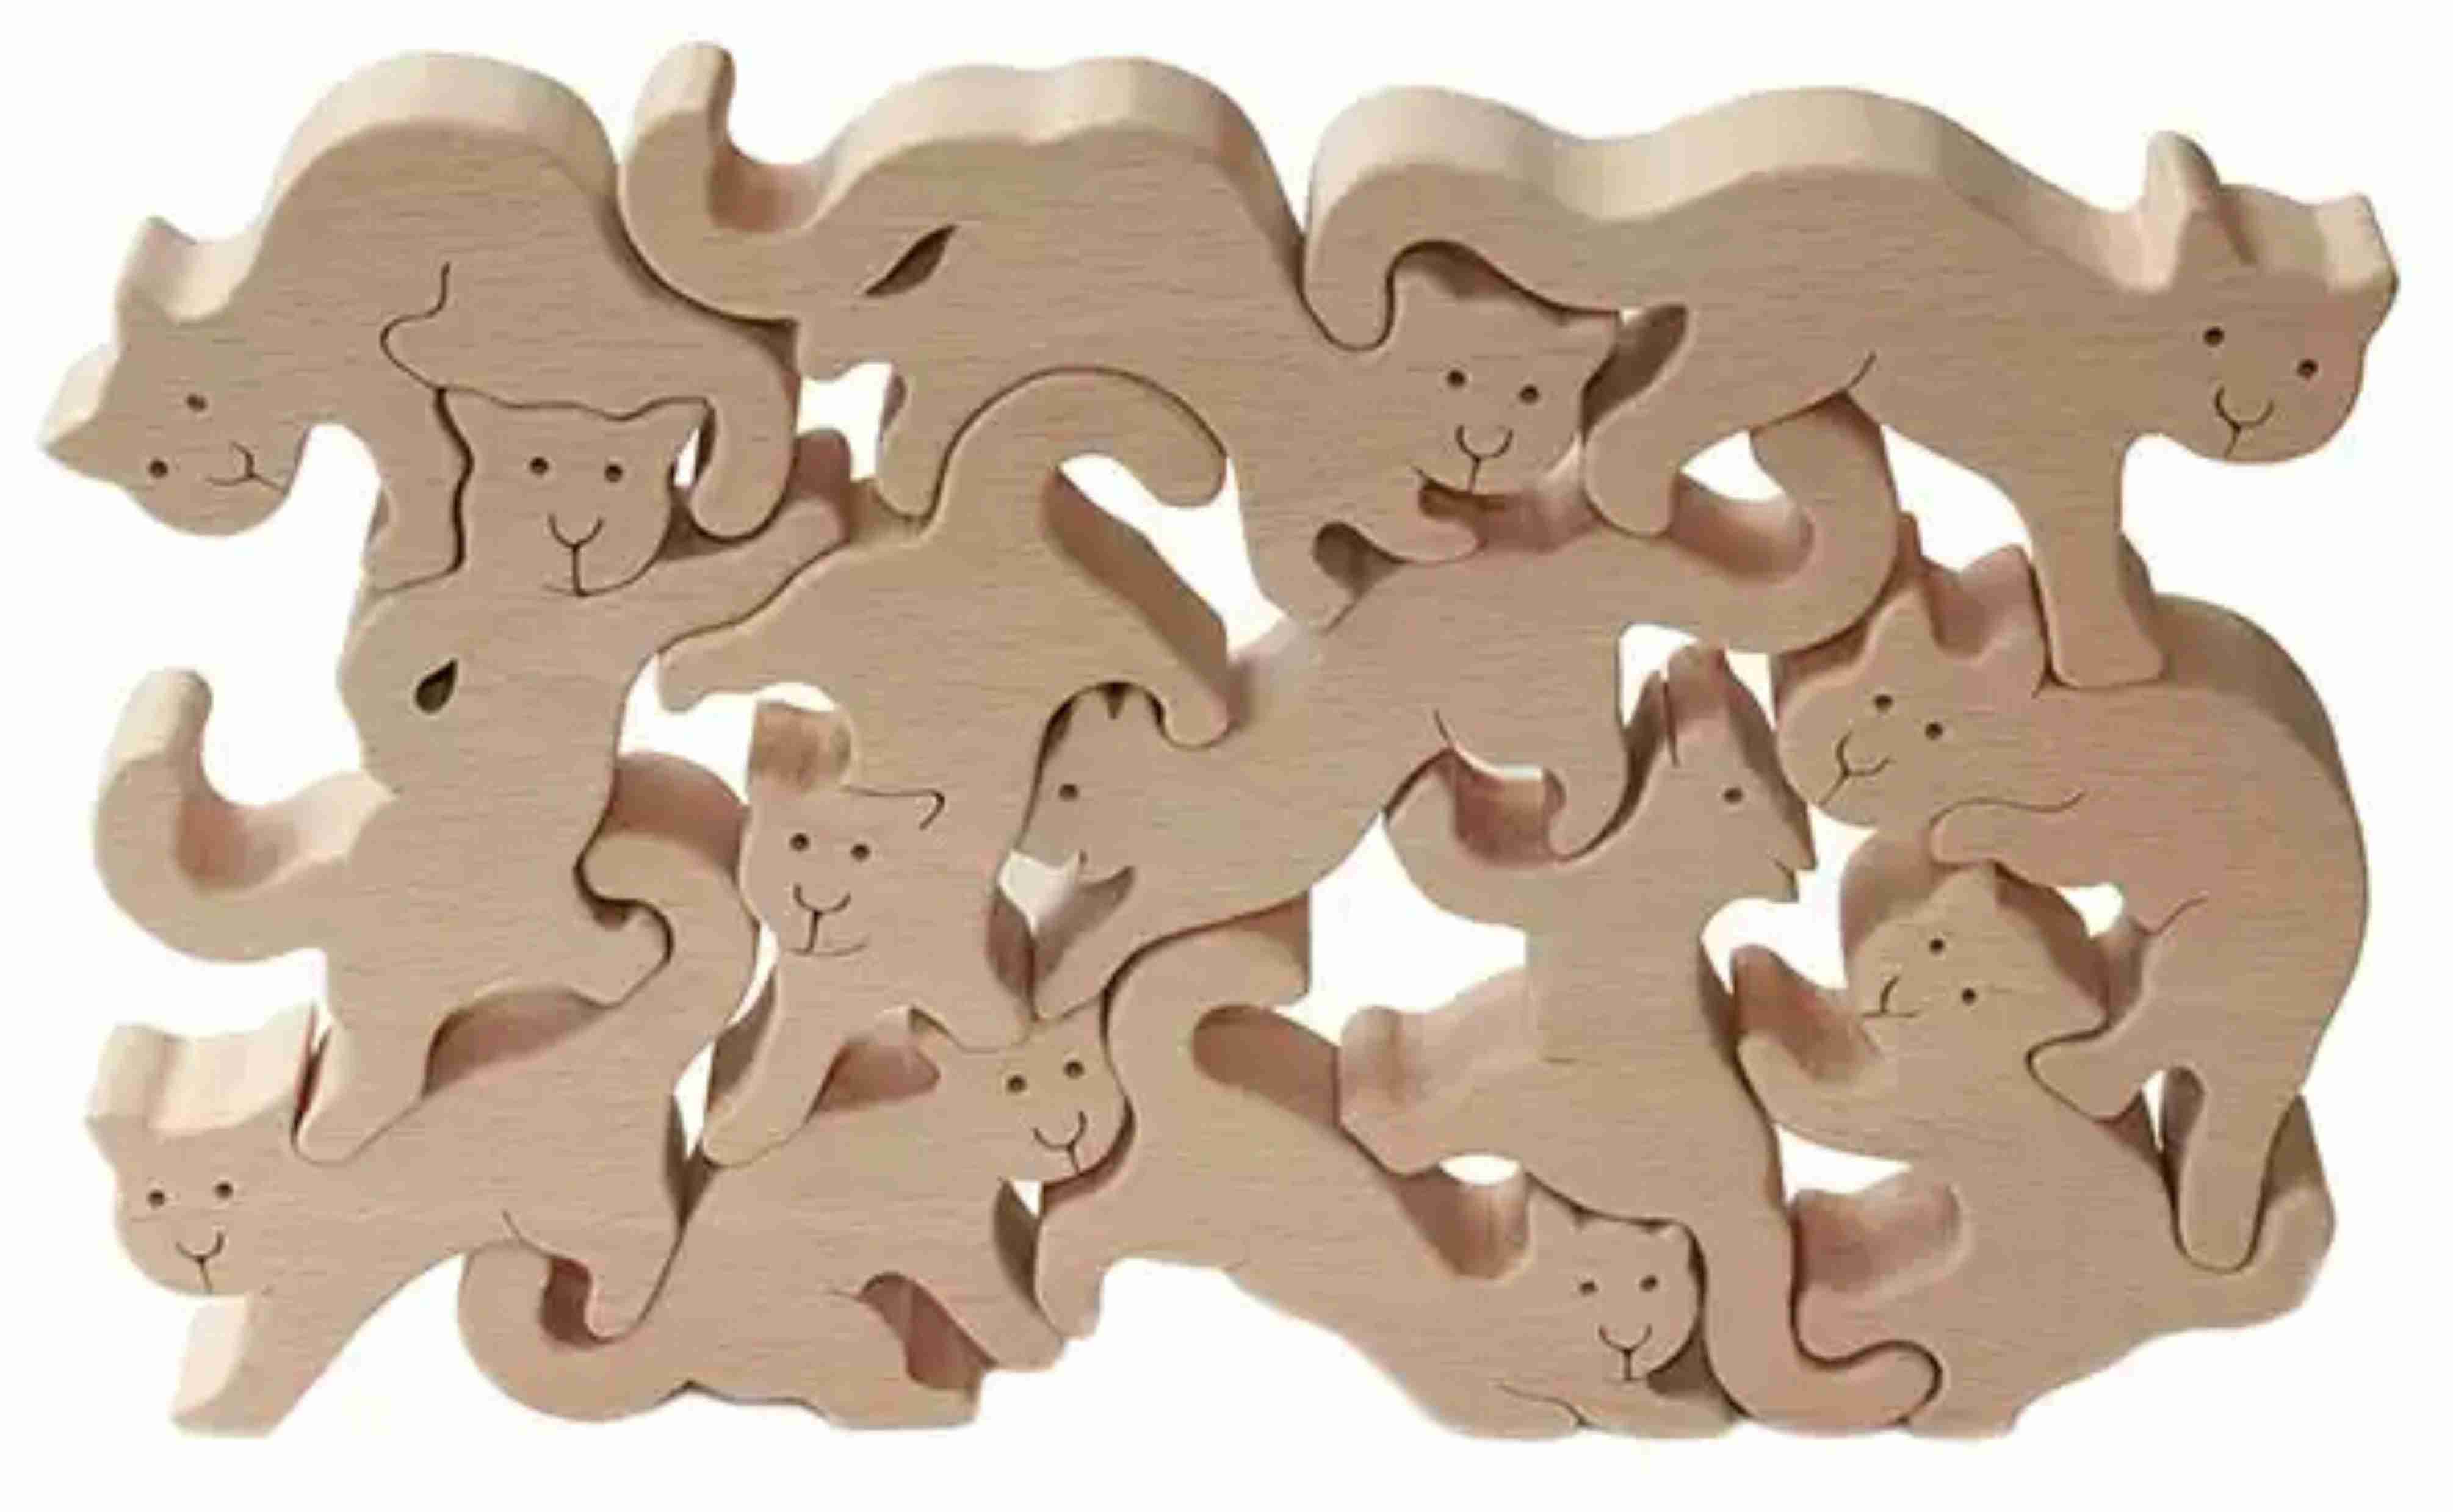 Cats Puzzle Free Vector CDR File